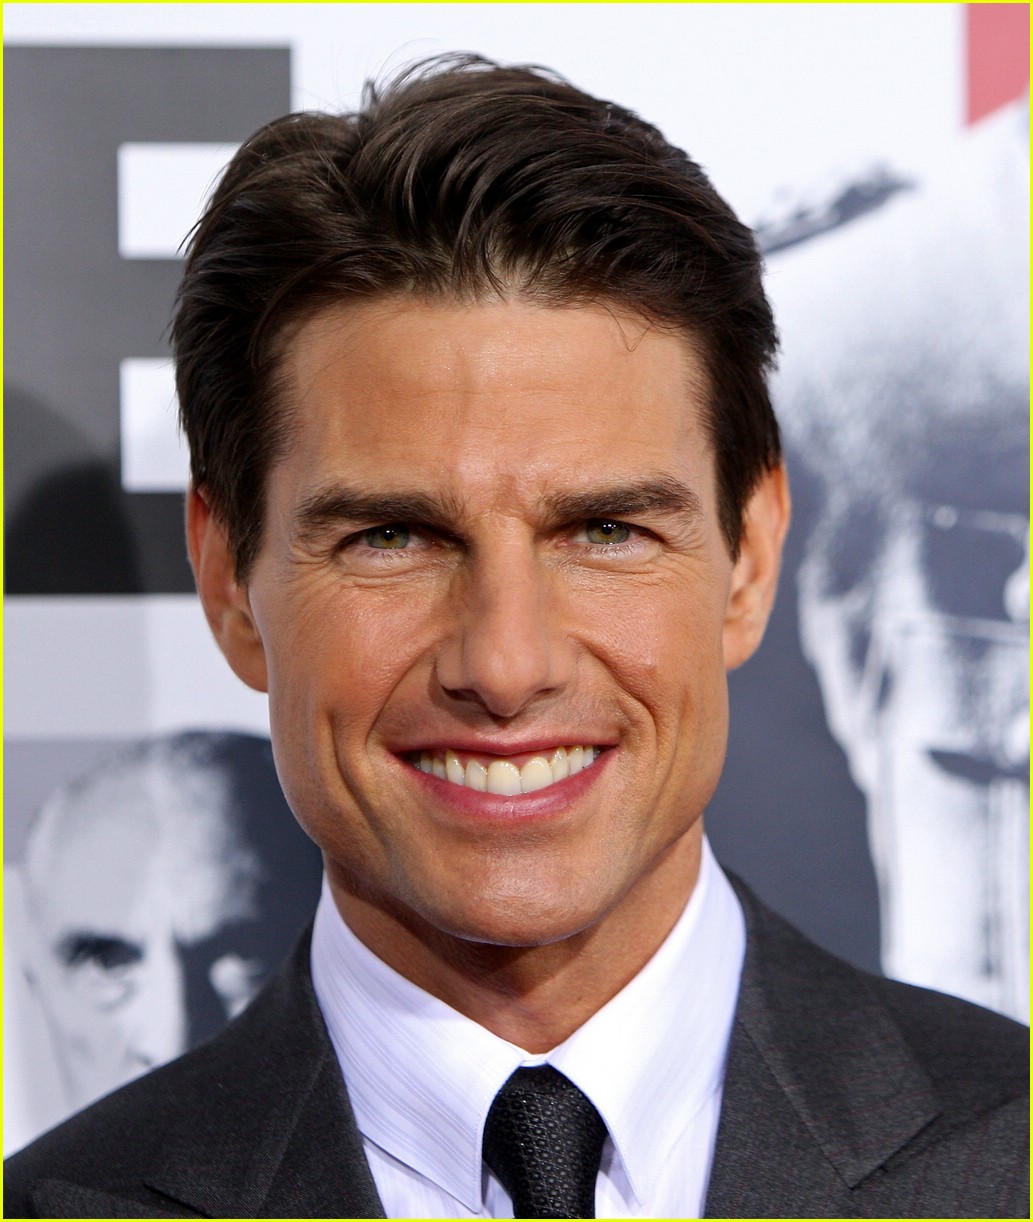 Hairstyles for men: Tom Cruise Hair - The Sleek Appearance 